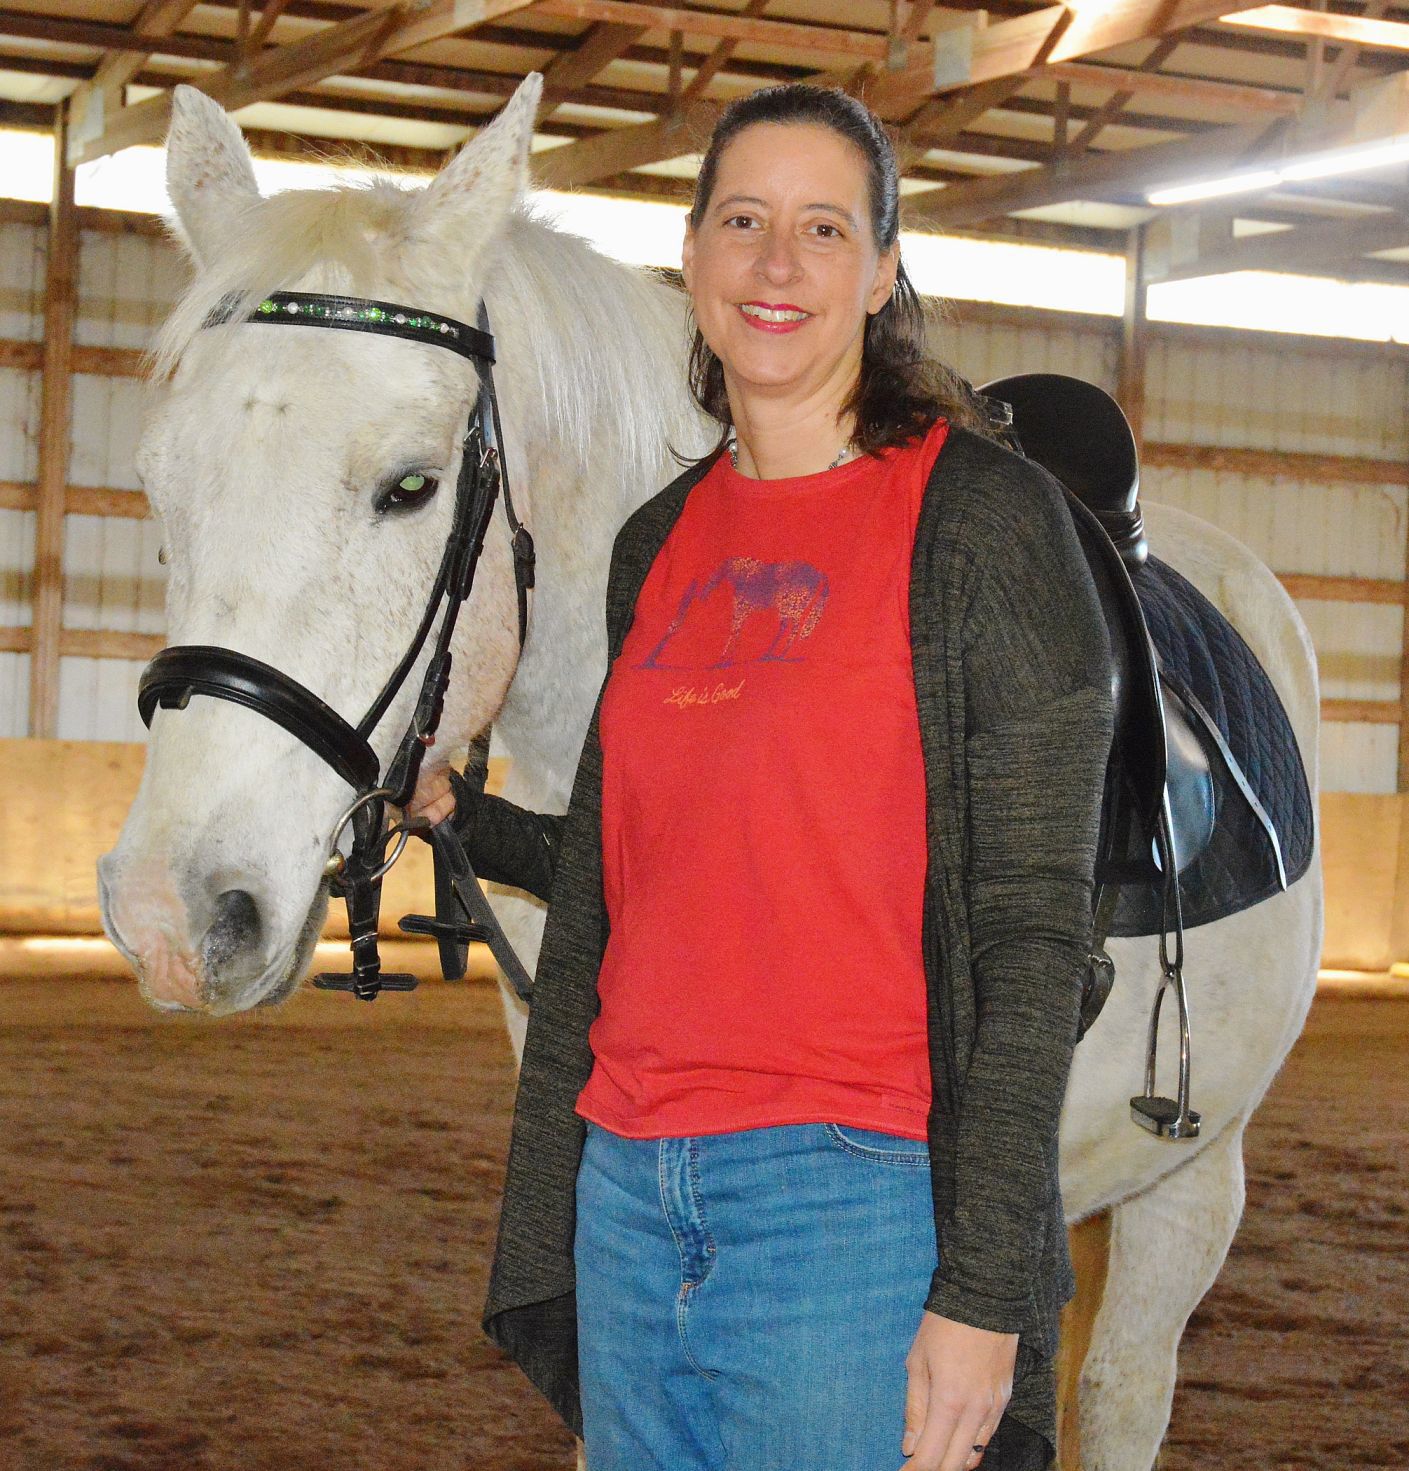 Emerald Equestrian Center offers variety of experiences, training Business mycouriertribune